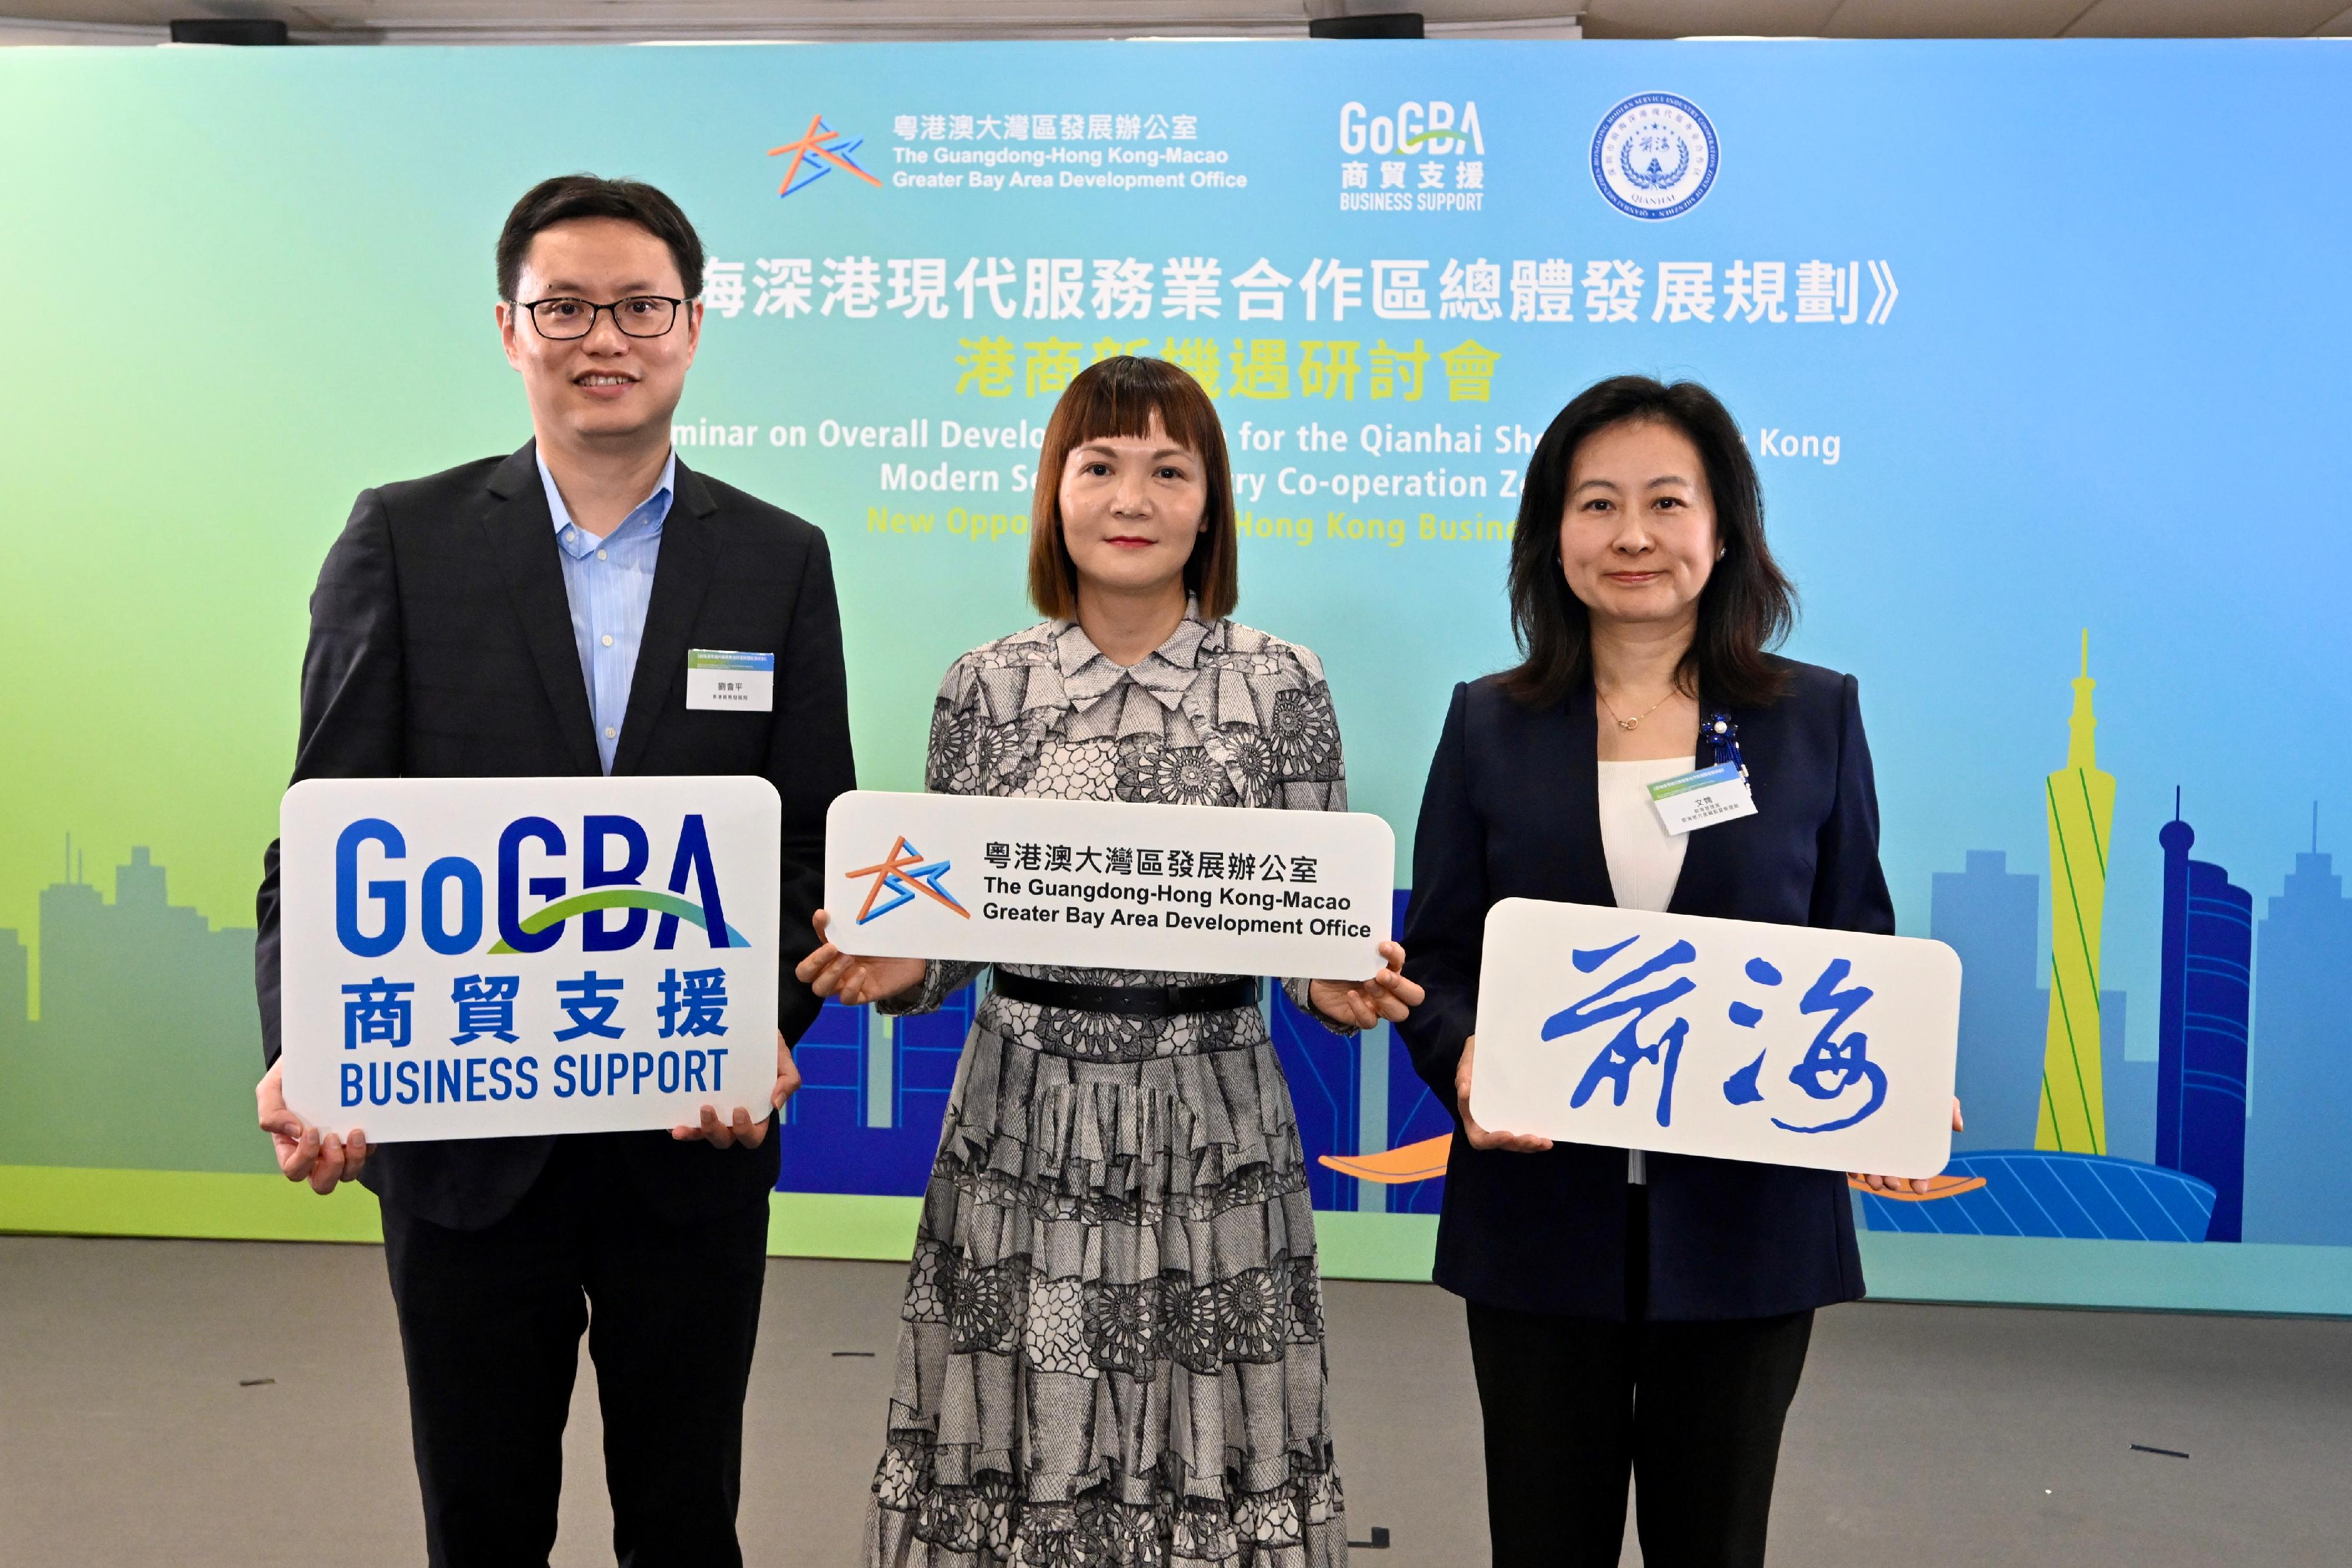 The Guangdong-Hong Kong-Macao Greater Bay Area Development Office under the Constitutional and Mainland Affairs Bureau held the GoGBA Development Day today (April 11). Photo shows the Commissioner for the Development of the Guangdong-Hong Kong-Macao Greater Bay Area, Ms Maisie Chan (centre); the Deputy Director General of Qianhai Authority, Director General of the Qianhai Financial Regulatory Bureau, Ms Wen Ping (right); and Deputy Executive Director of the Hong Kong Trade Development Council Mr Patrick Lau (left), at the event.